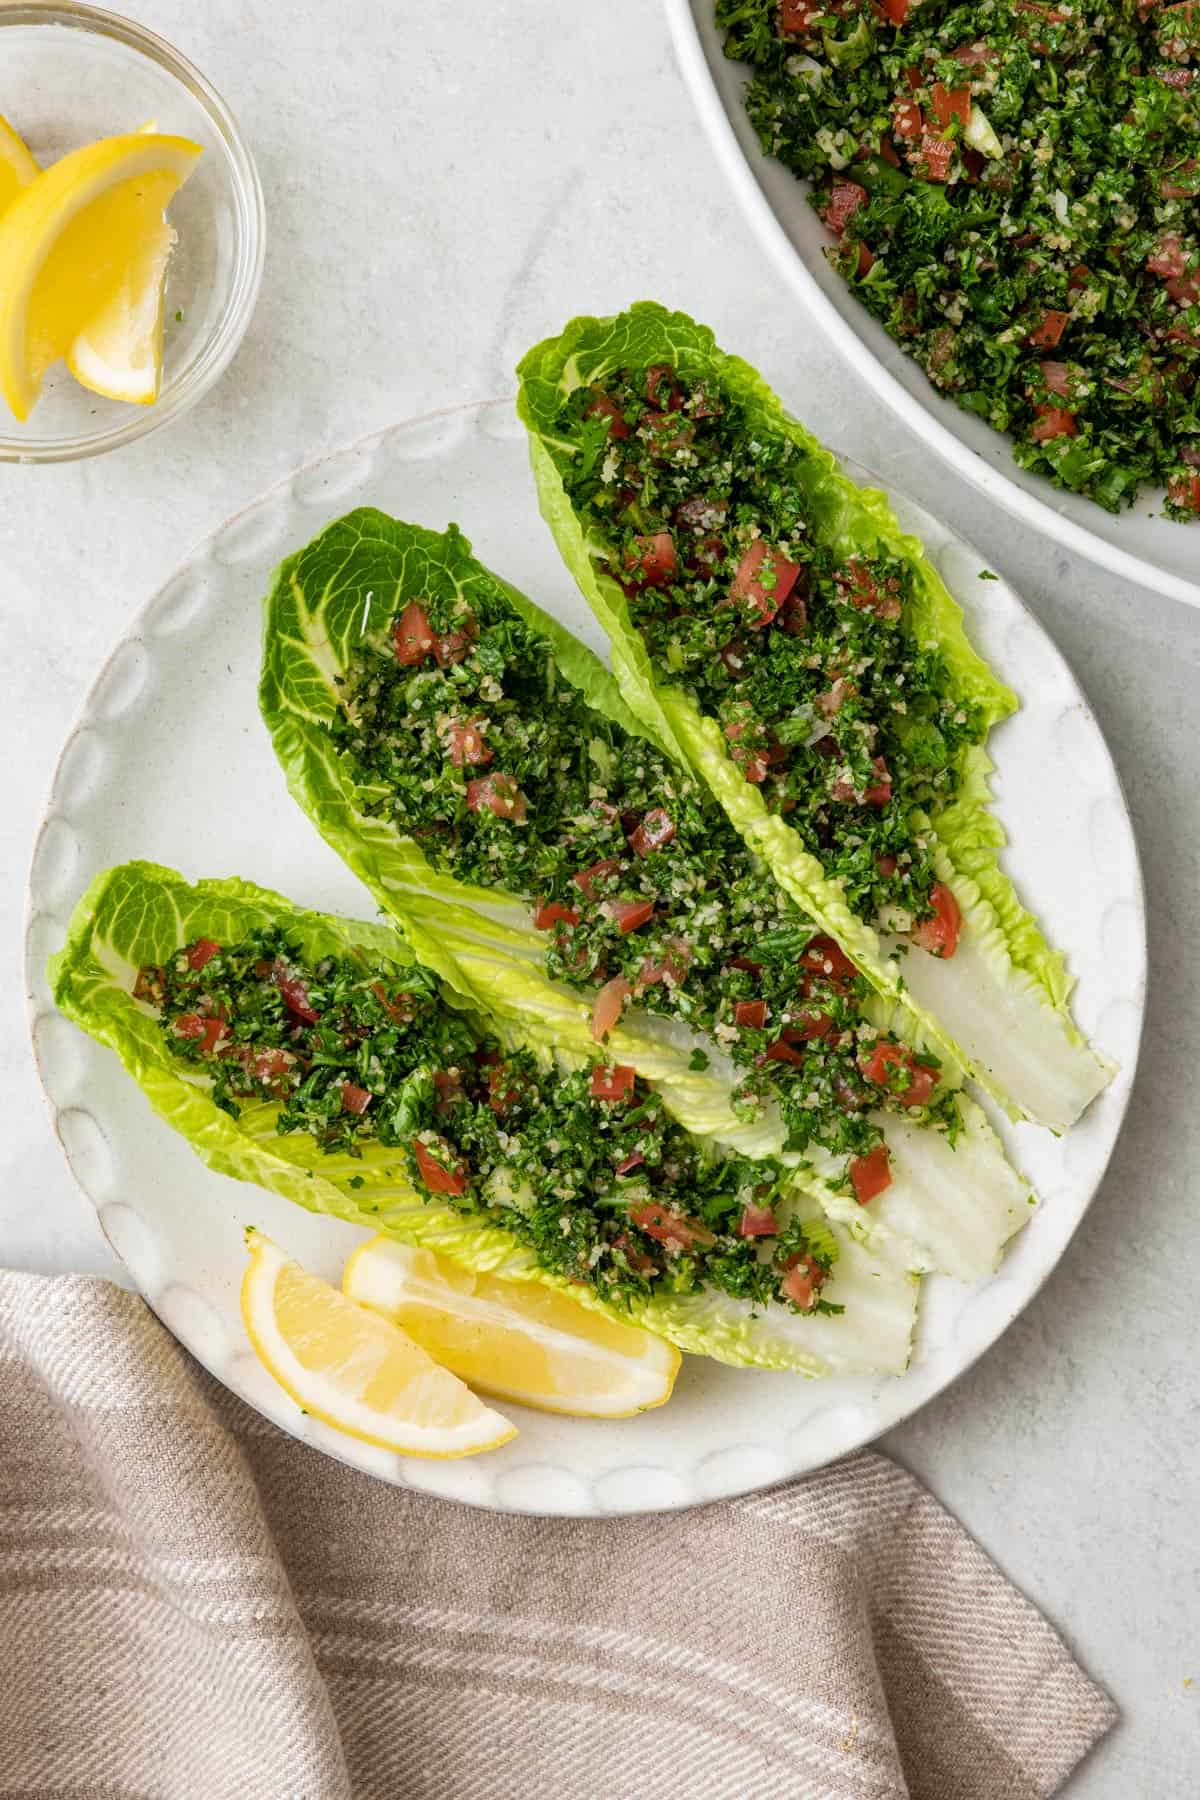 3 romaine lettuce cups filled with tabbouleh salad on a serving plate with lemon wedges and the bowl of salad nearby.